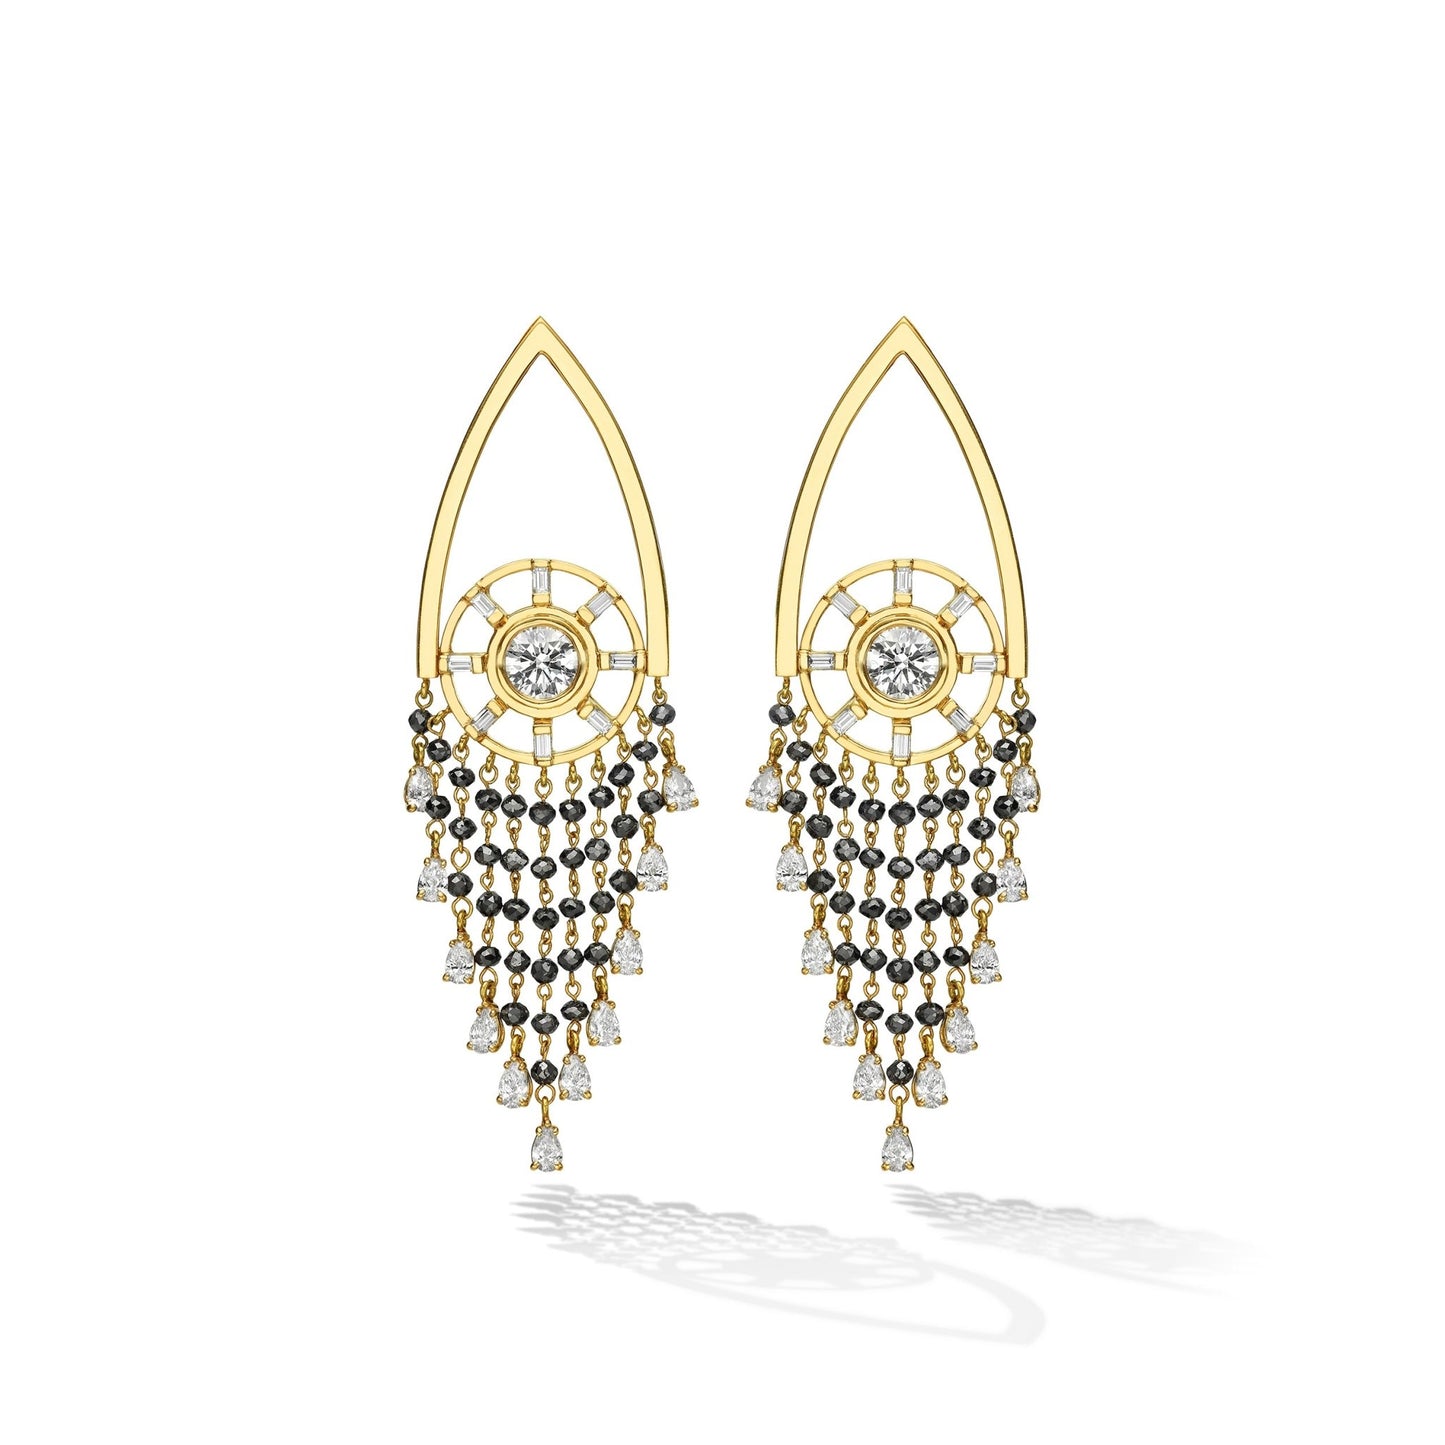 Yellow Gold Reflections Chandelier Earrings with Black and White Diamonds - Cadar